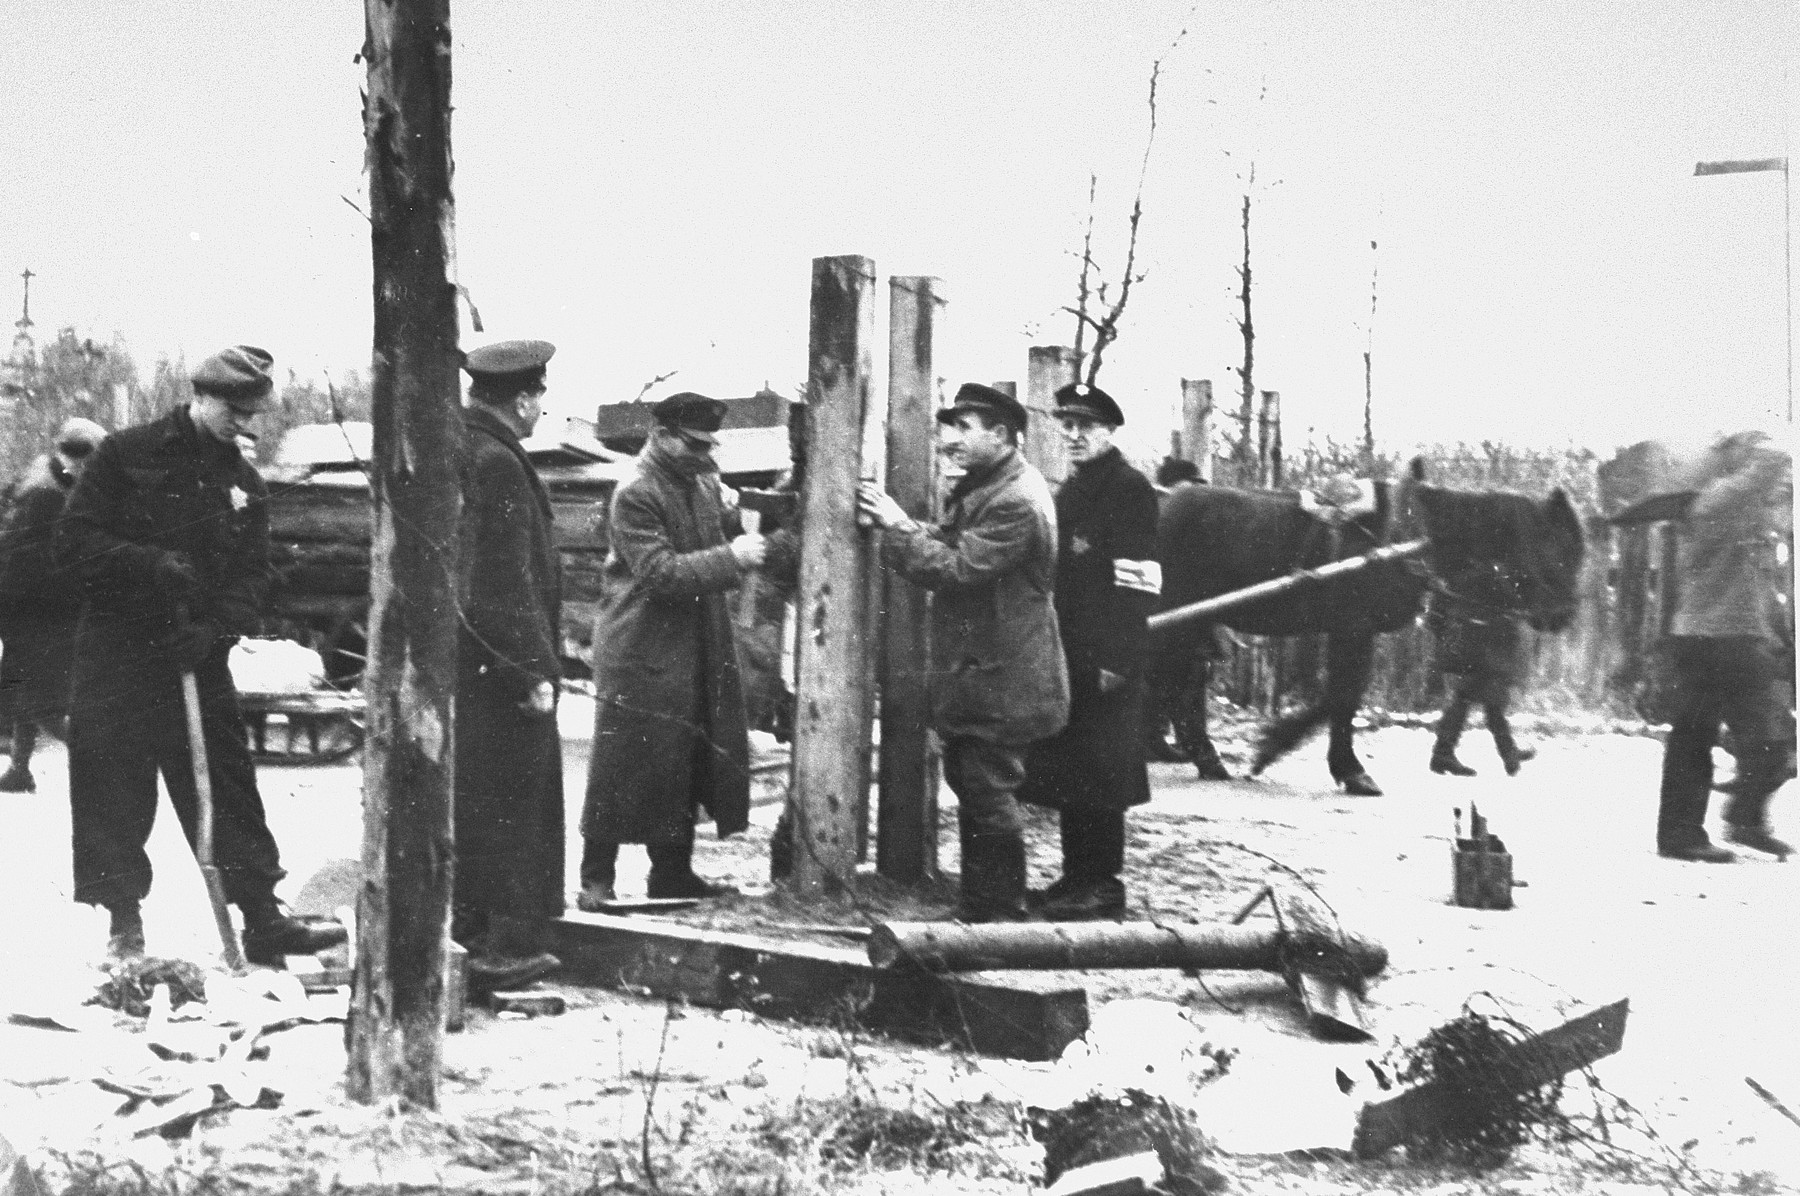 Jews repairing or moving the ghetto fence after a reduction of the ghetto boundaries.  Pictured at the left is Abe Malnik.  Second from the right is Yankel Kaplan.

On July 24, 1941, three weeks before all Jews had to move into the ghetto, the Kovno city government ordered that the Jews erect a fence around the ghetto.  A new order stipulated that work was to begin on July 30.  Fifty men were to report to work at 8:00 in the morning for the purpose of erecting the fence.  Posts were placed one meter apart and barbed wire was strung every twenty centimeters.  Signs were posted warning that the area  within three meters of the fence was declared a "death zone"; anyone caught in that zone would be summarily shot.  Many Jews were shot for approaching the fence.  However, when guards were not looking, Jews and Lithuanians traded through the fence, and some Jews, using wire cutters, managed to cut the fence and escape from the ghetto.  The ghetto fire department was responsible for mainaining and repairing the fence.